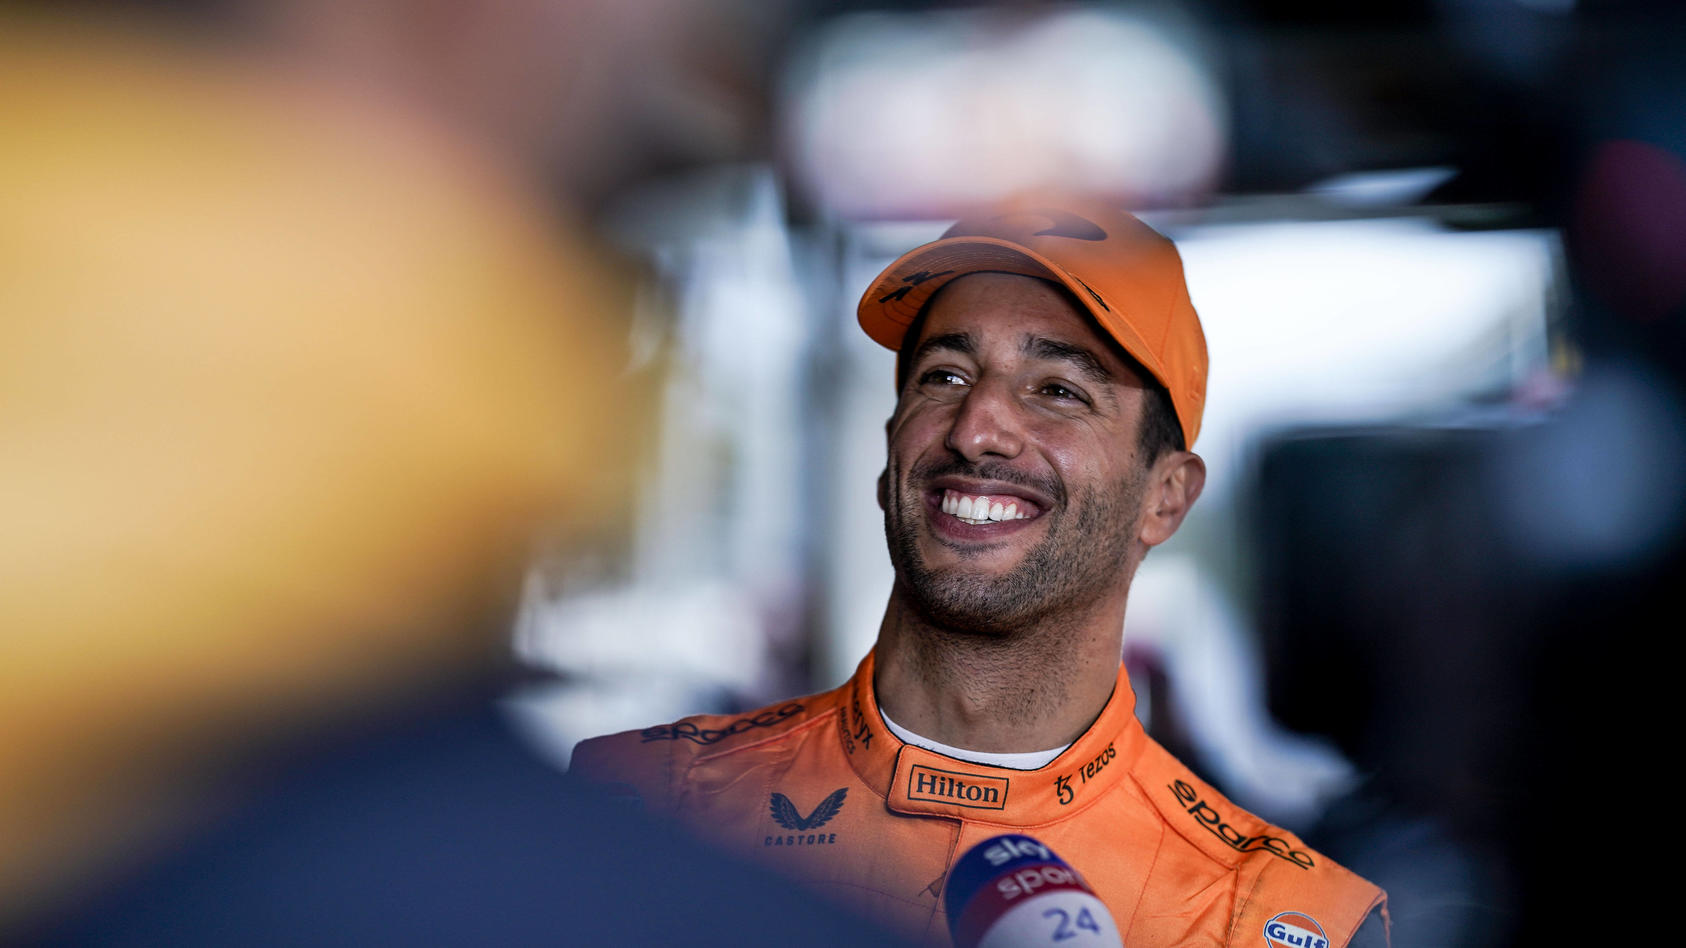  February 24, 2022, Montmelo, Spain: DANIEL RICCIARDO of Australia and McLaren F1 Team in the paddock during day two of the 2022 FIA Formula 1 Pre-Season testing at Circuit de .Barcelona-Catalunya in Montmelo, Spain. Montmelo Spain - ZUMAg147 2022022